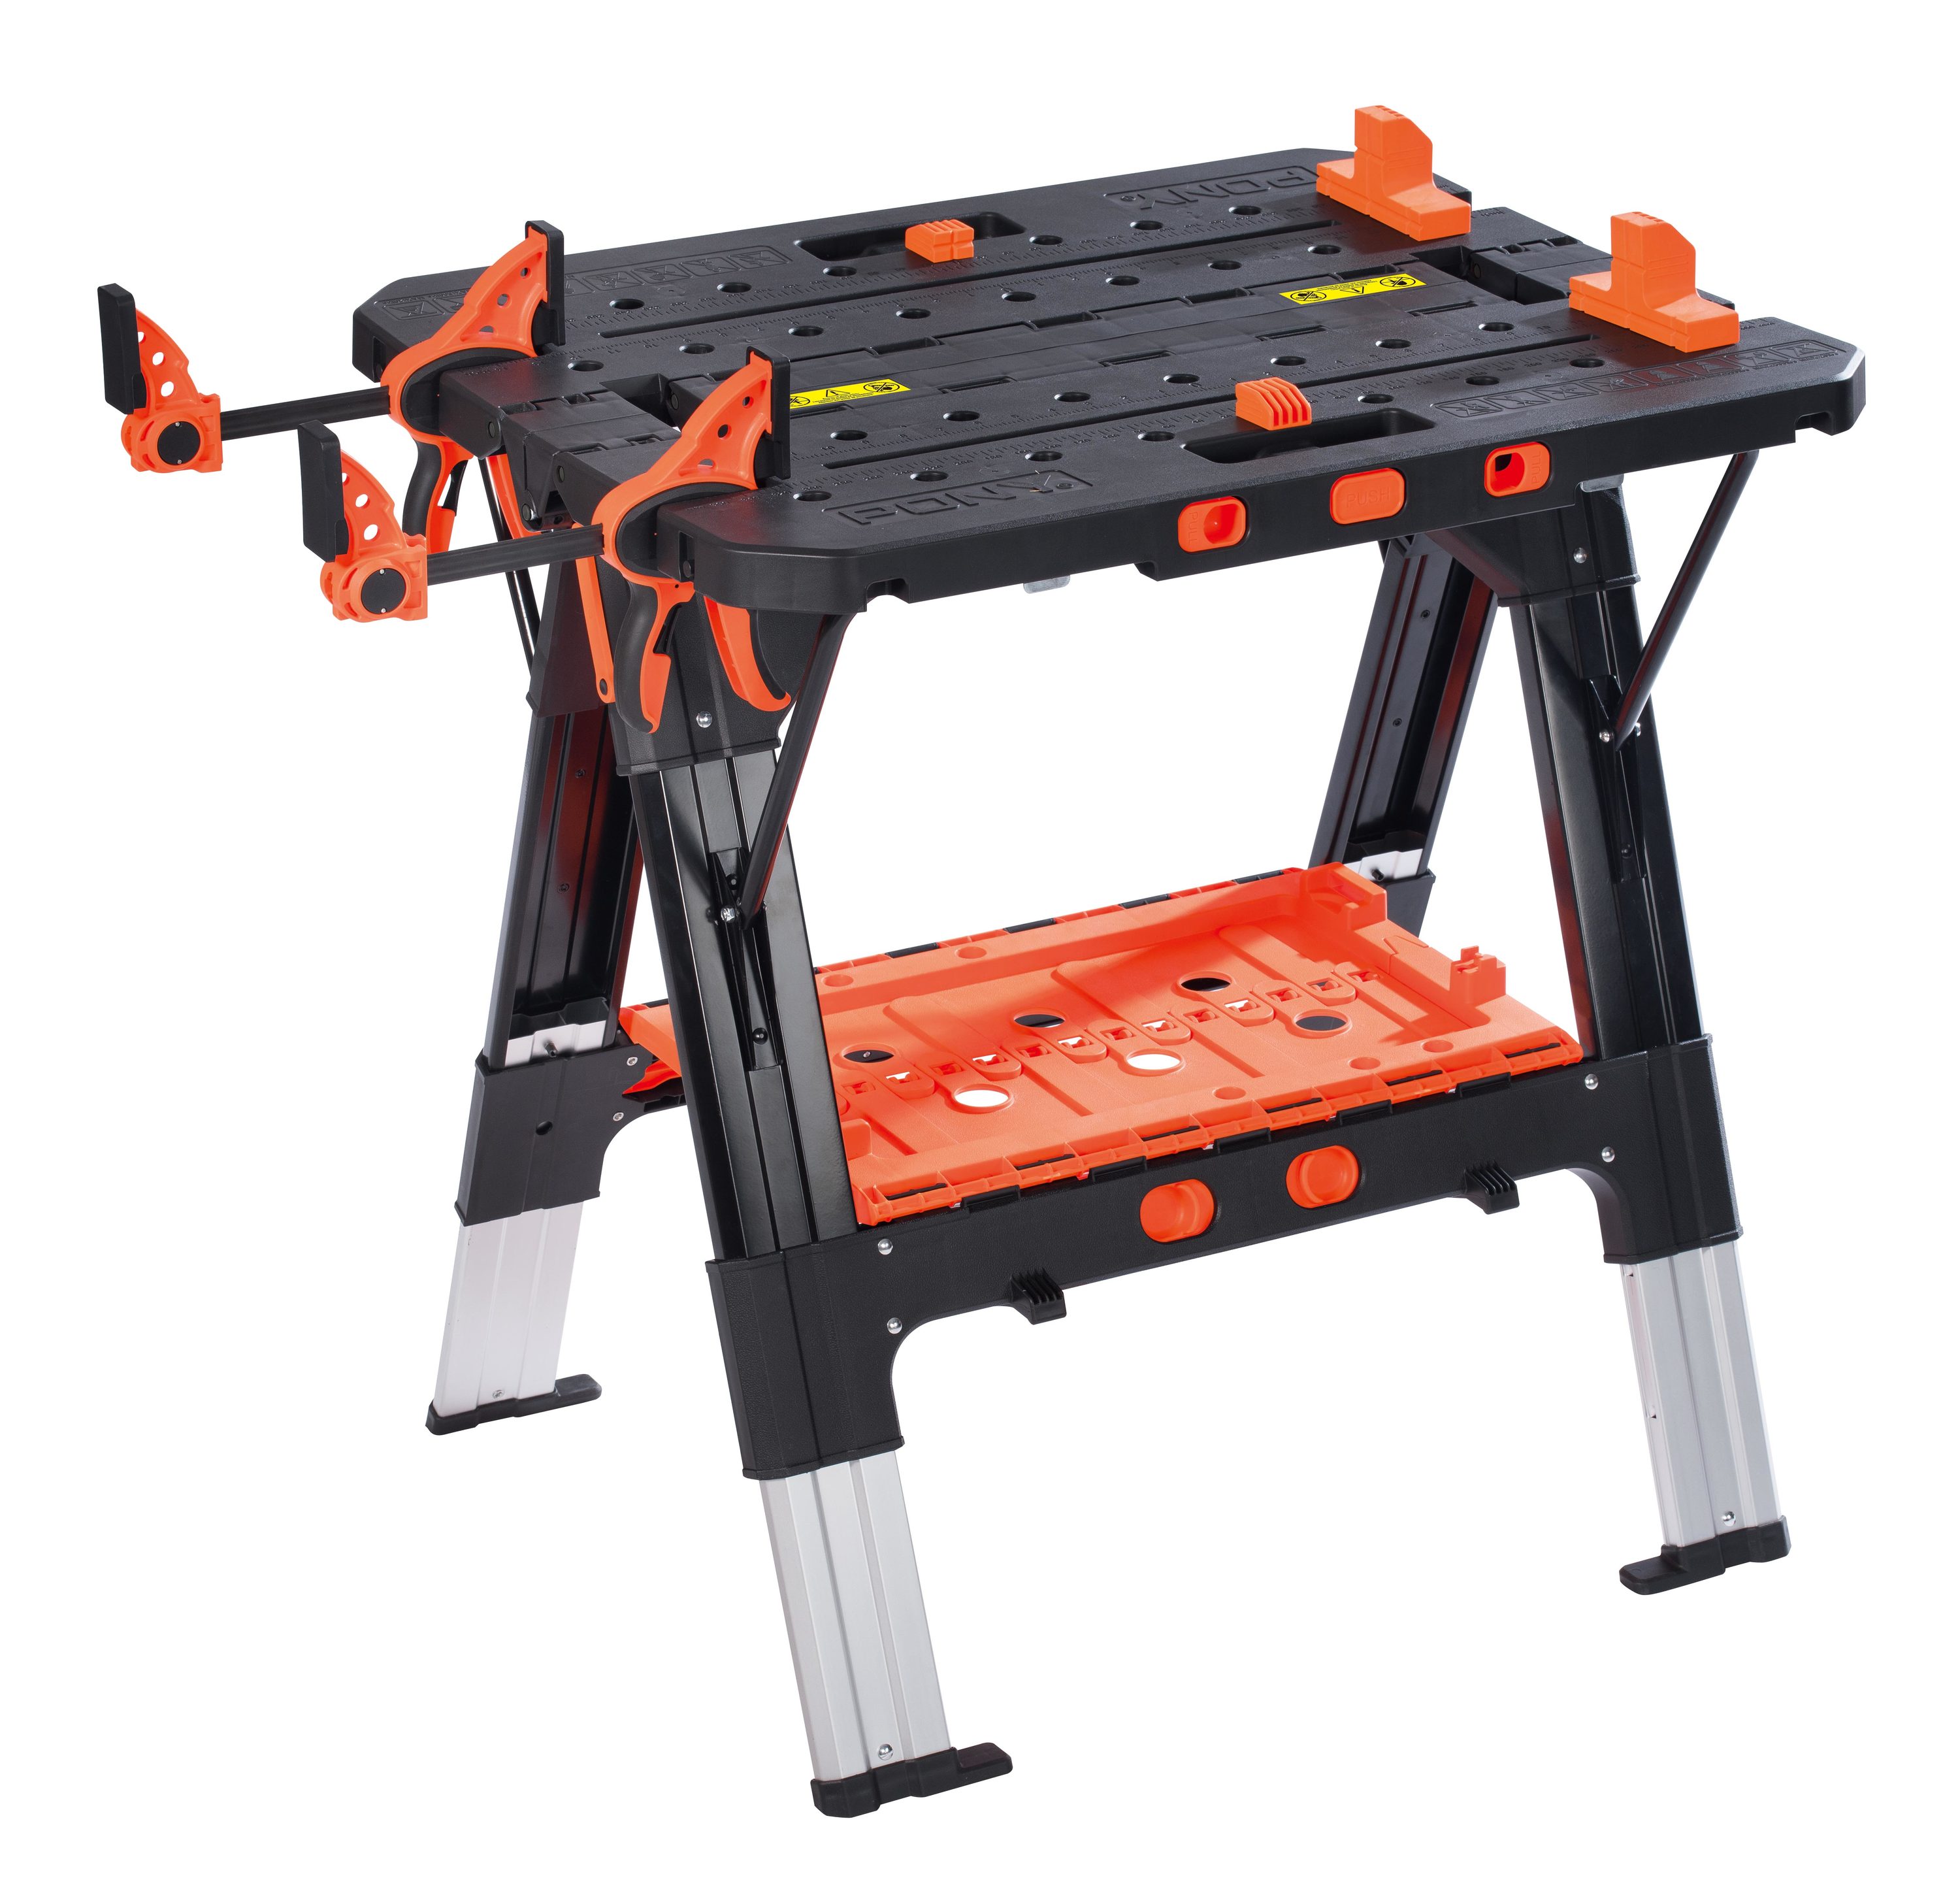 Pony 31-in W x 32-in H-Drawer Black Plastic Work Bench Lowes - $99 YMMV (may be in store only)